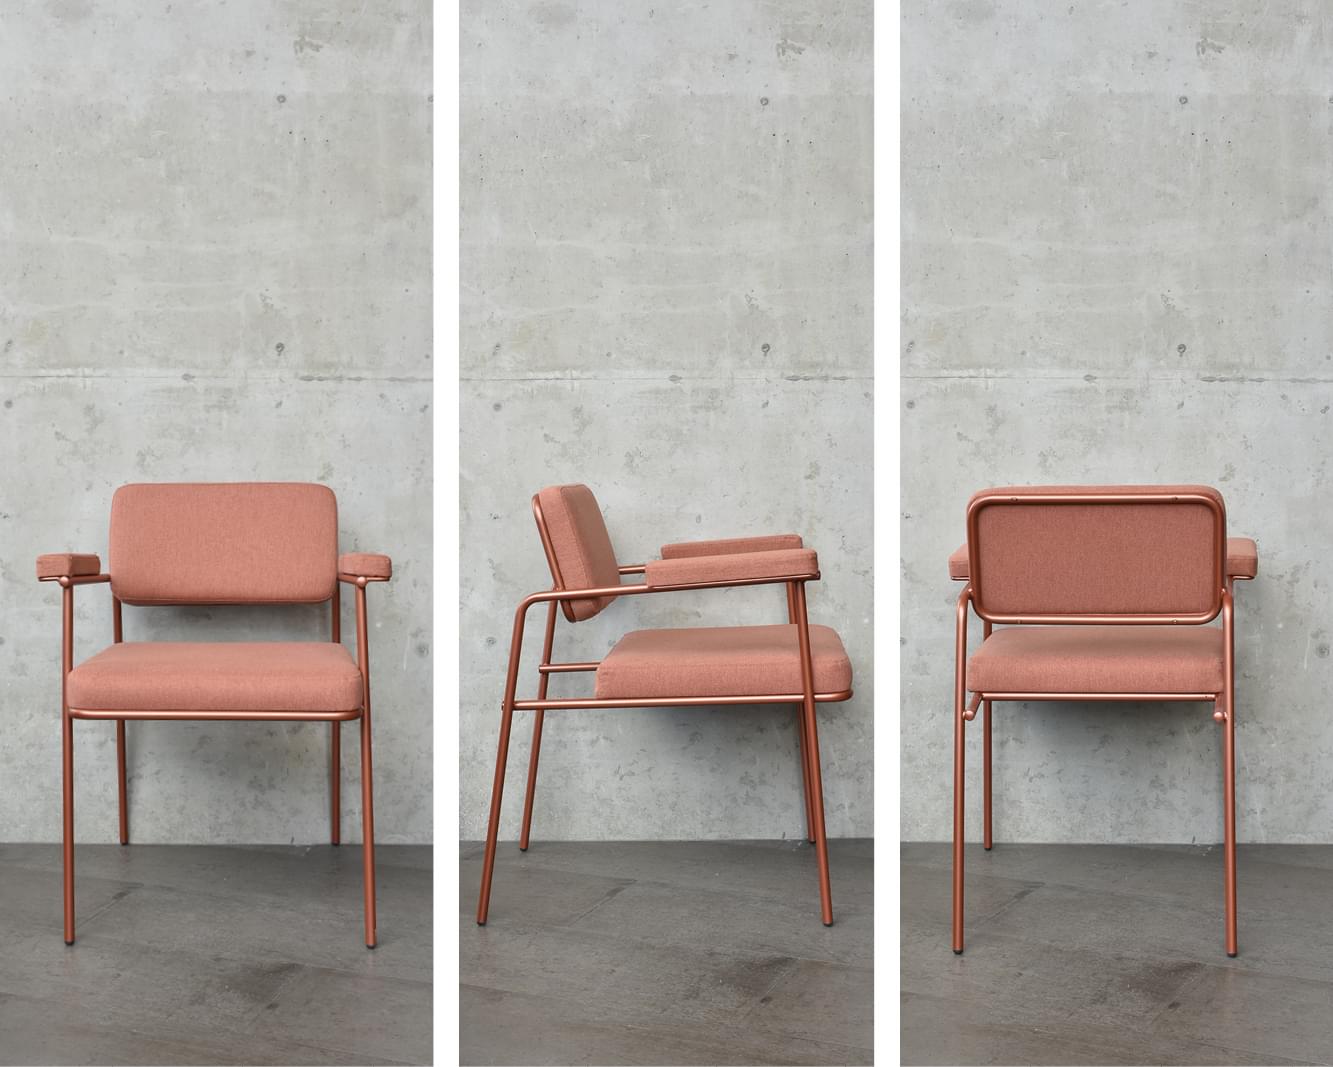 Boogie armchair - New metal framed furniture as seen at the Salone del Mobile Milano April, 2019